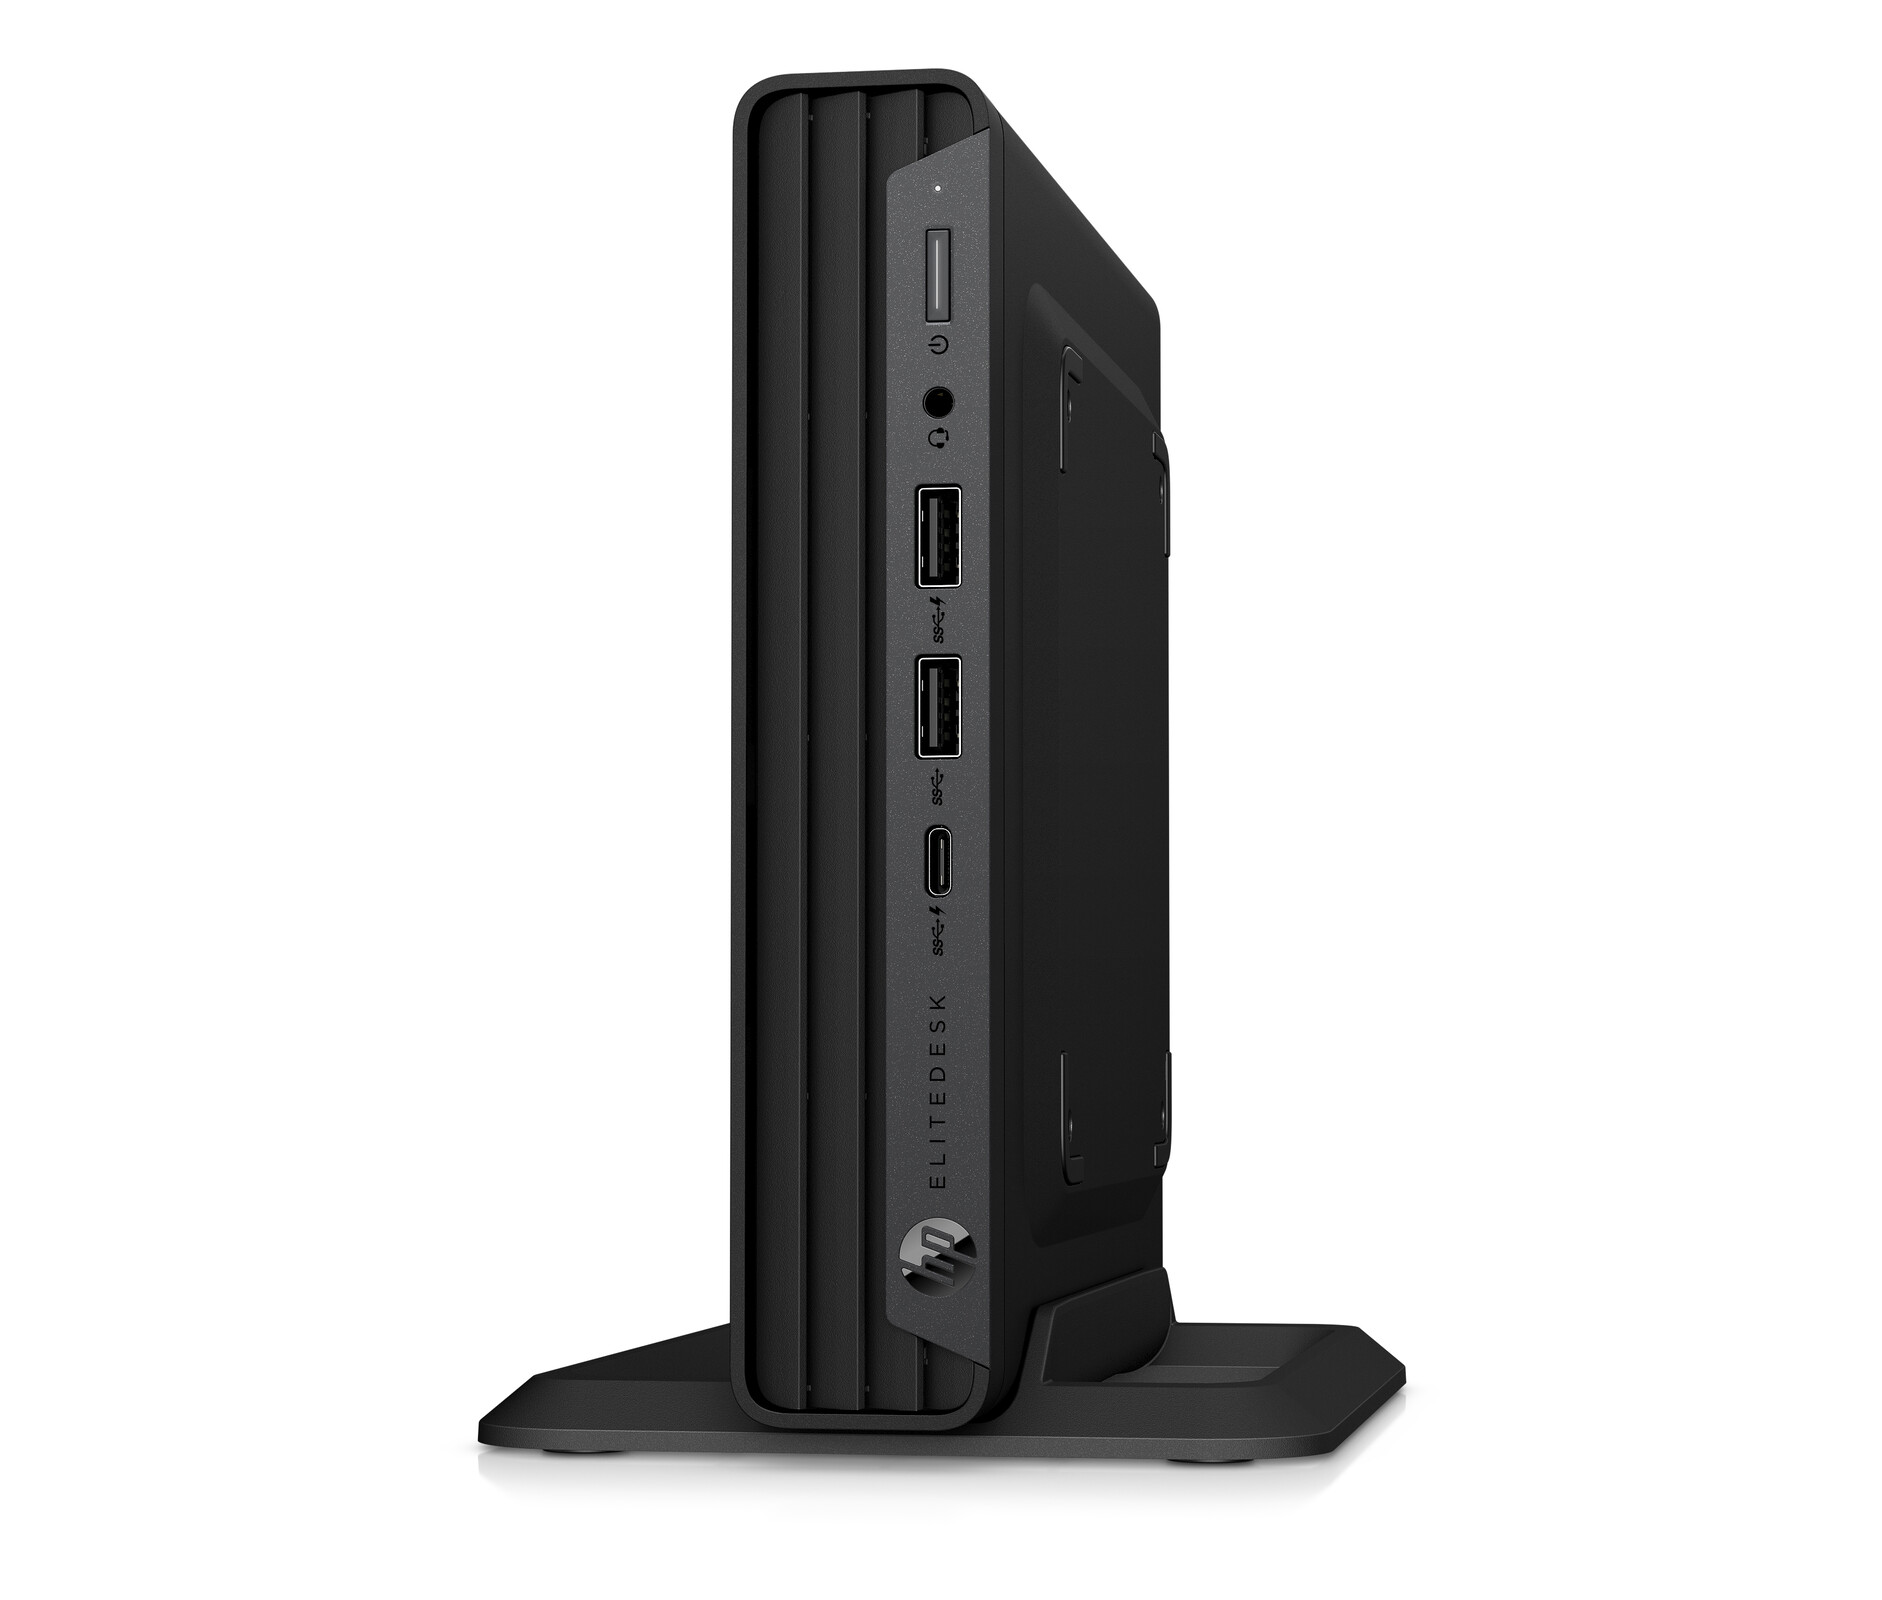 Hp Elitedesk 800 G6 Mini Pc Sff And Tower Pc Offerings Pack Increased Horse Power And Ample Expandability Notebookcheck Net News